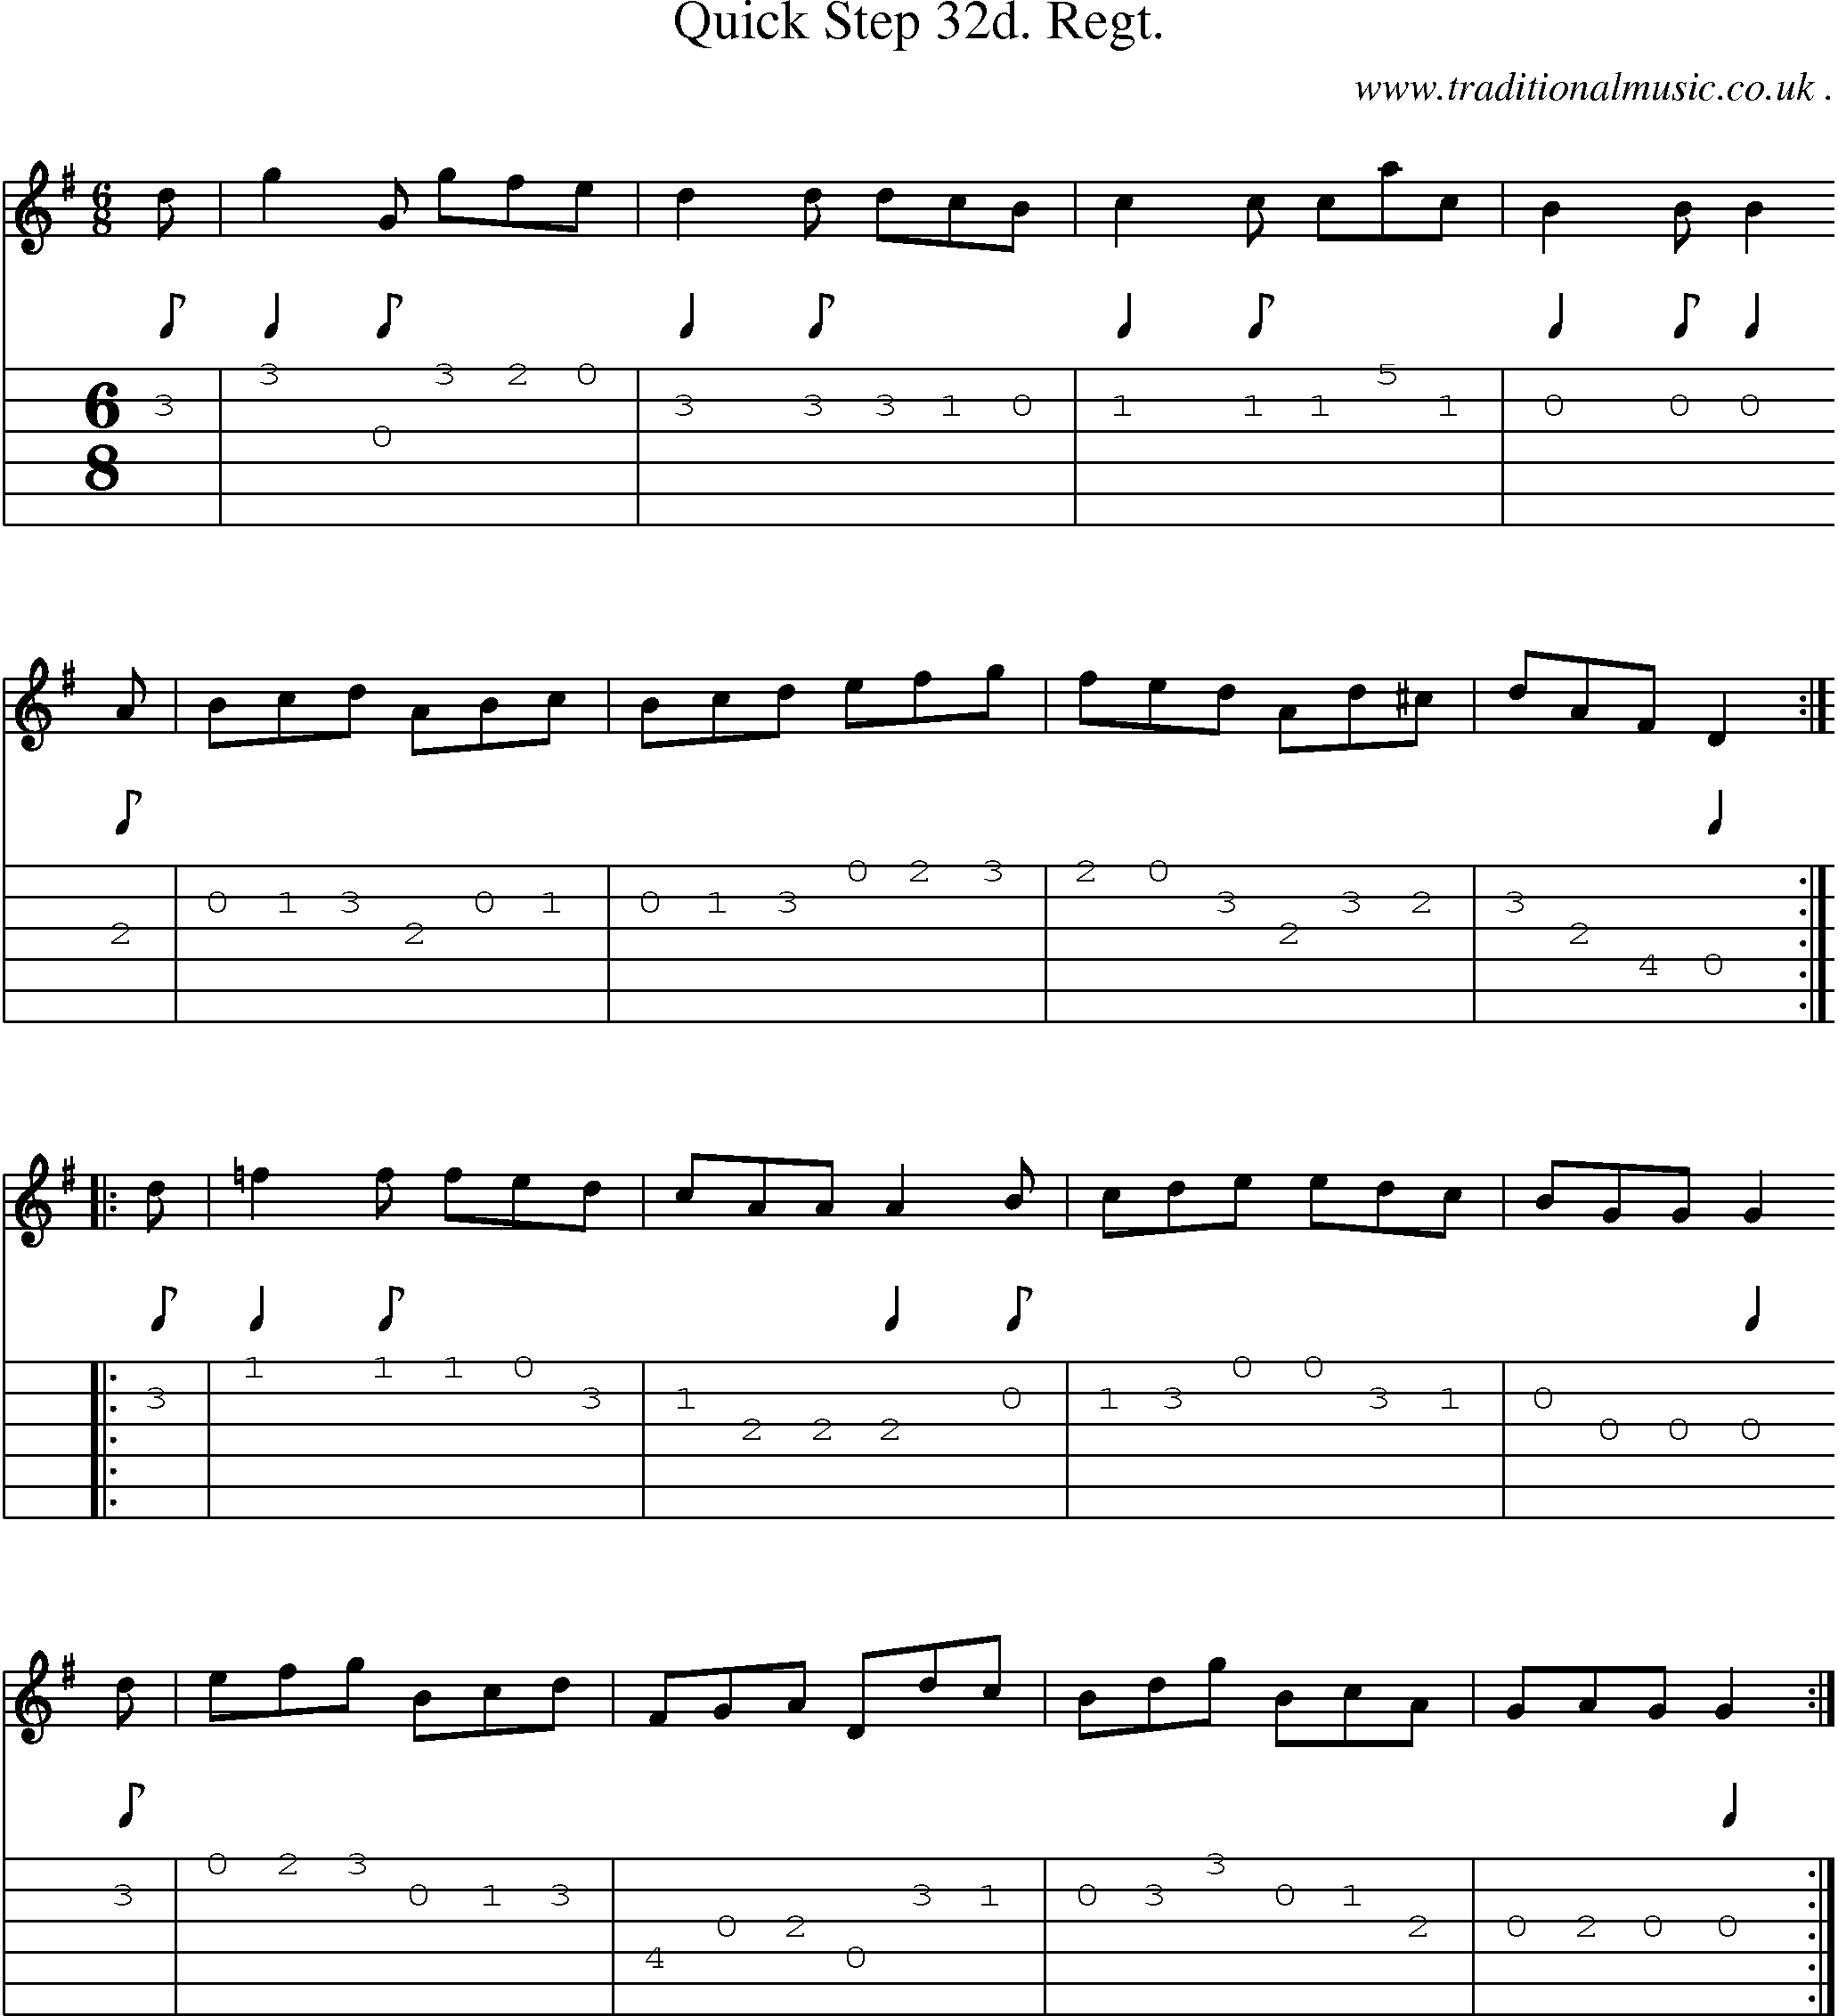 Sheet-Music and Guitar Tabs for Quick Step 32d Regt